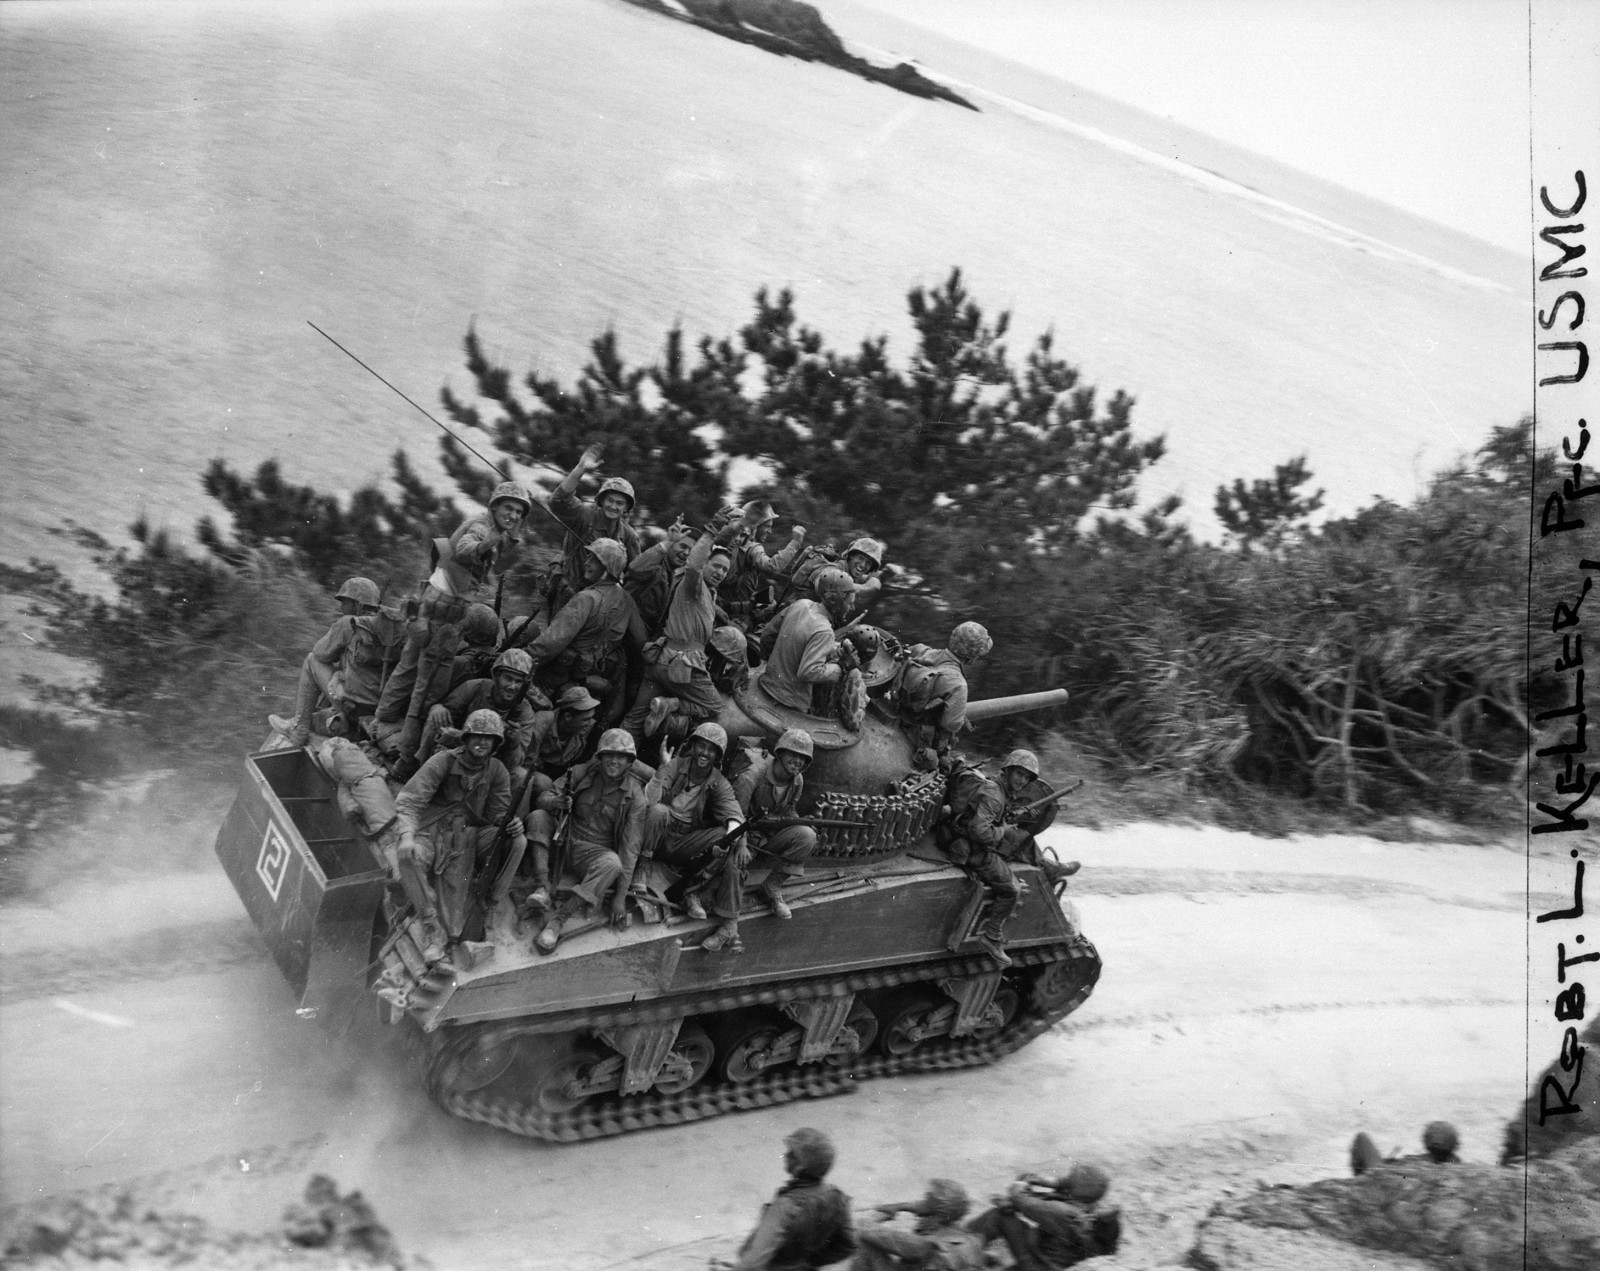 Riflemen of the 29th Marine Regiment ride a M4A3 Sherman 105mm of Company A, 6th Tank Battalion during the 6th Marine Division's drive on Chuda along the west coast of Okinawa. After expecting a contested landing on April 1, 1945, and seeing little of the Japanese, the Americans were in high spirits as objectives are taken ahead of schedule in Northern Okinawa; the Shuri Line would rob them of their high morale. The 29th Marines cut off the Motobu Peninsula and seized Chuda at 1200 Hours on April 6, 1945. Tank-infantry teams encountered sporadic resistance during the initial invasion; most problems were from the Japanese blowing bridges as they retreated inland. Destruction of bridges had been inept; frequently only a span of the bridge had been blown or cracked. The engineers cut quick bypasses for the vehicles, repairing the broken spans later. 500 M4A3 Shermans with the M4 105mm gun were built in late 1944. Later versions of the 105mm Sherman had a more advanced horizontal volute spring suspension (HVSS) with wider tracks that allowed for a smoother ride. Note partially dismantled deep wading gear to allow the M4A3 to move through deep water during the landings a few days before. The M4A3 Sherman with the M4 105mm howitzer was not popular with the tankers, who preferred the M1 76mm high-velocity gun in case of tank-against-tank engagements. However, the 105mm-equipped Shermans were very popular with ground troops, who used tanks as mobile pillboxes, taking out Japanese positions with point-blank high explosive fire.